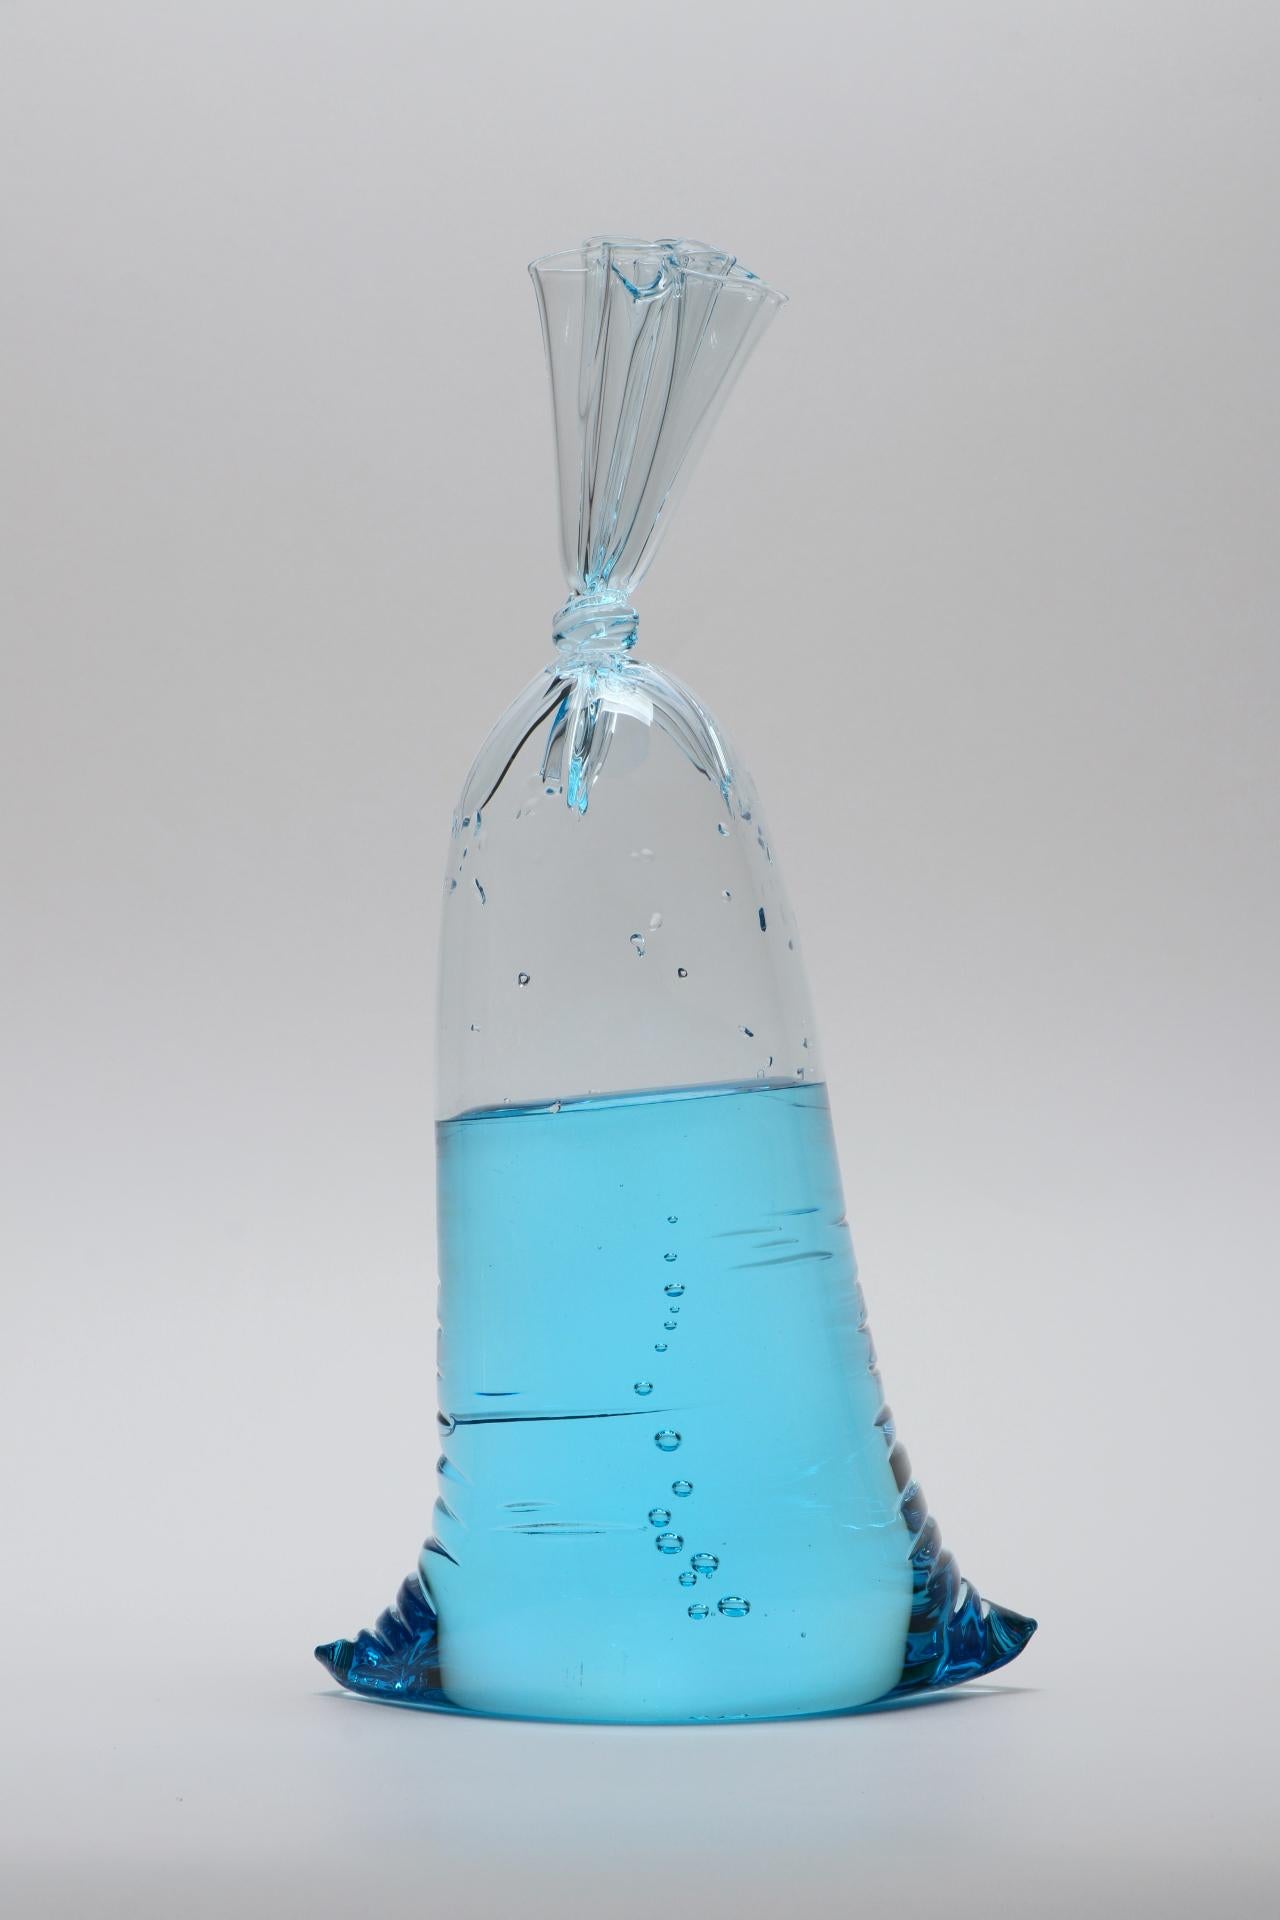 NEW RELEASE! Blue Series - Hyperreal small blue water bag glass sculpture, solid and hollow glass by Dylan Martinez. 

Size: 14.75 x 7.5 x 4.75 inches

Dylan Martinez's hyperreal sculptures are hot sculpted glass, hand molded entirely by the artist.